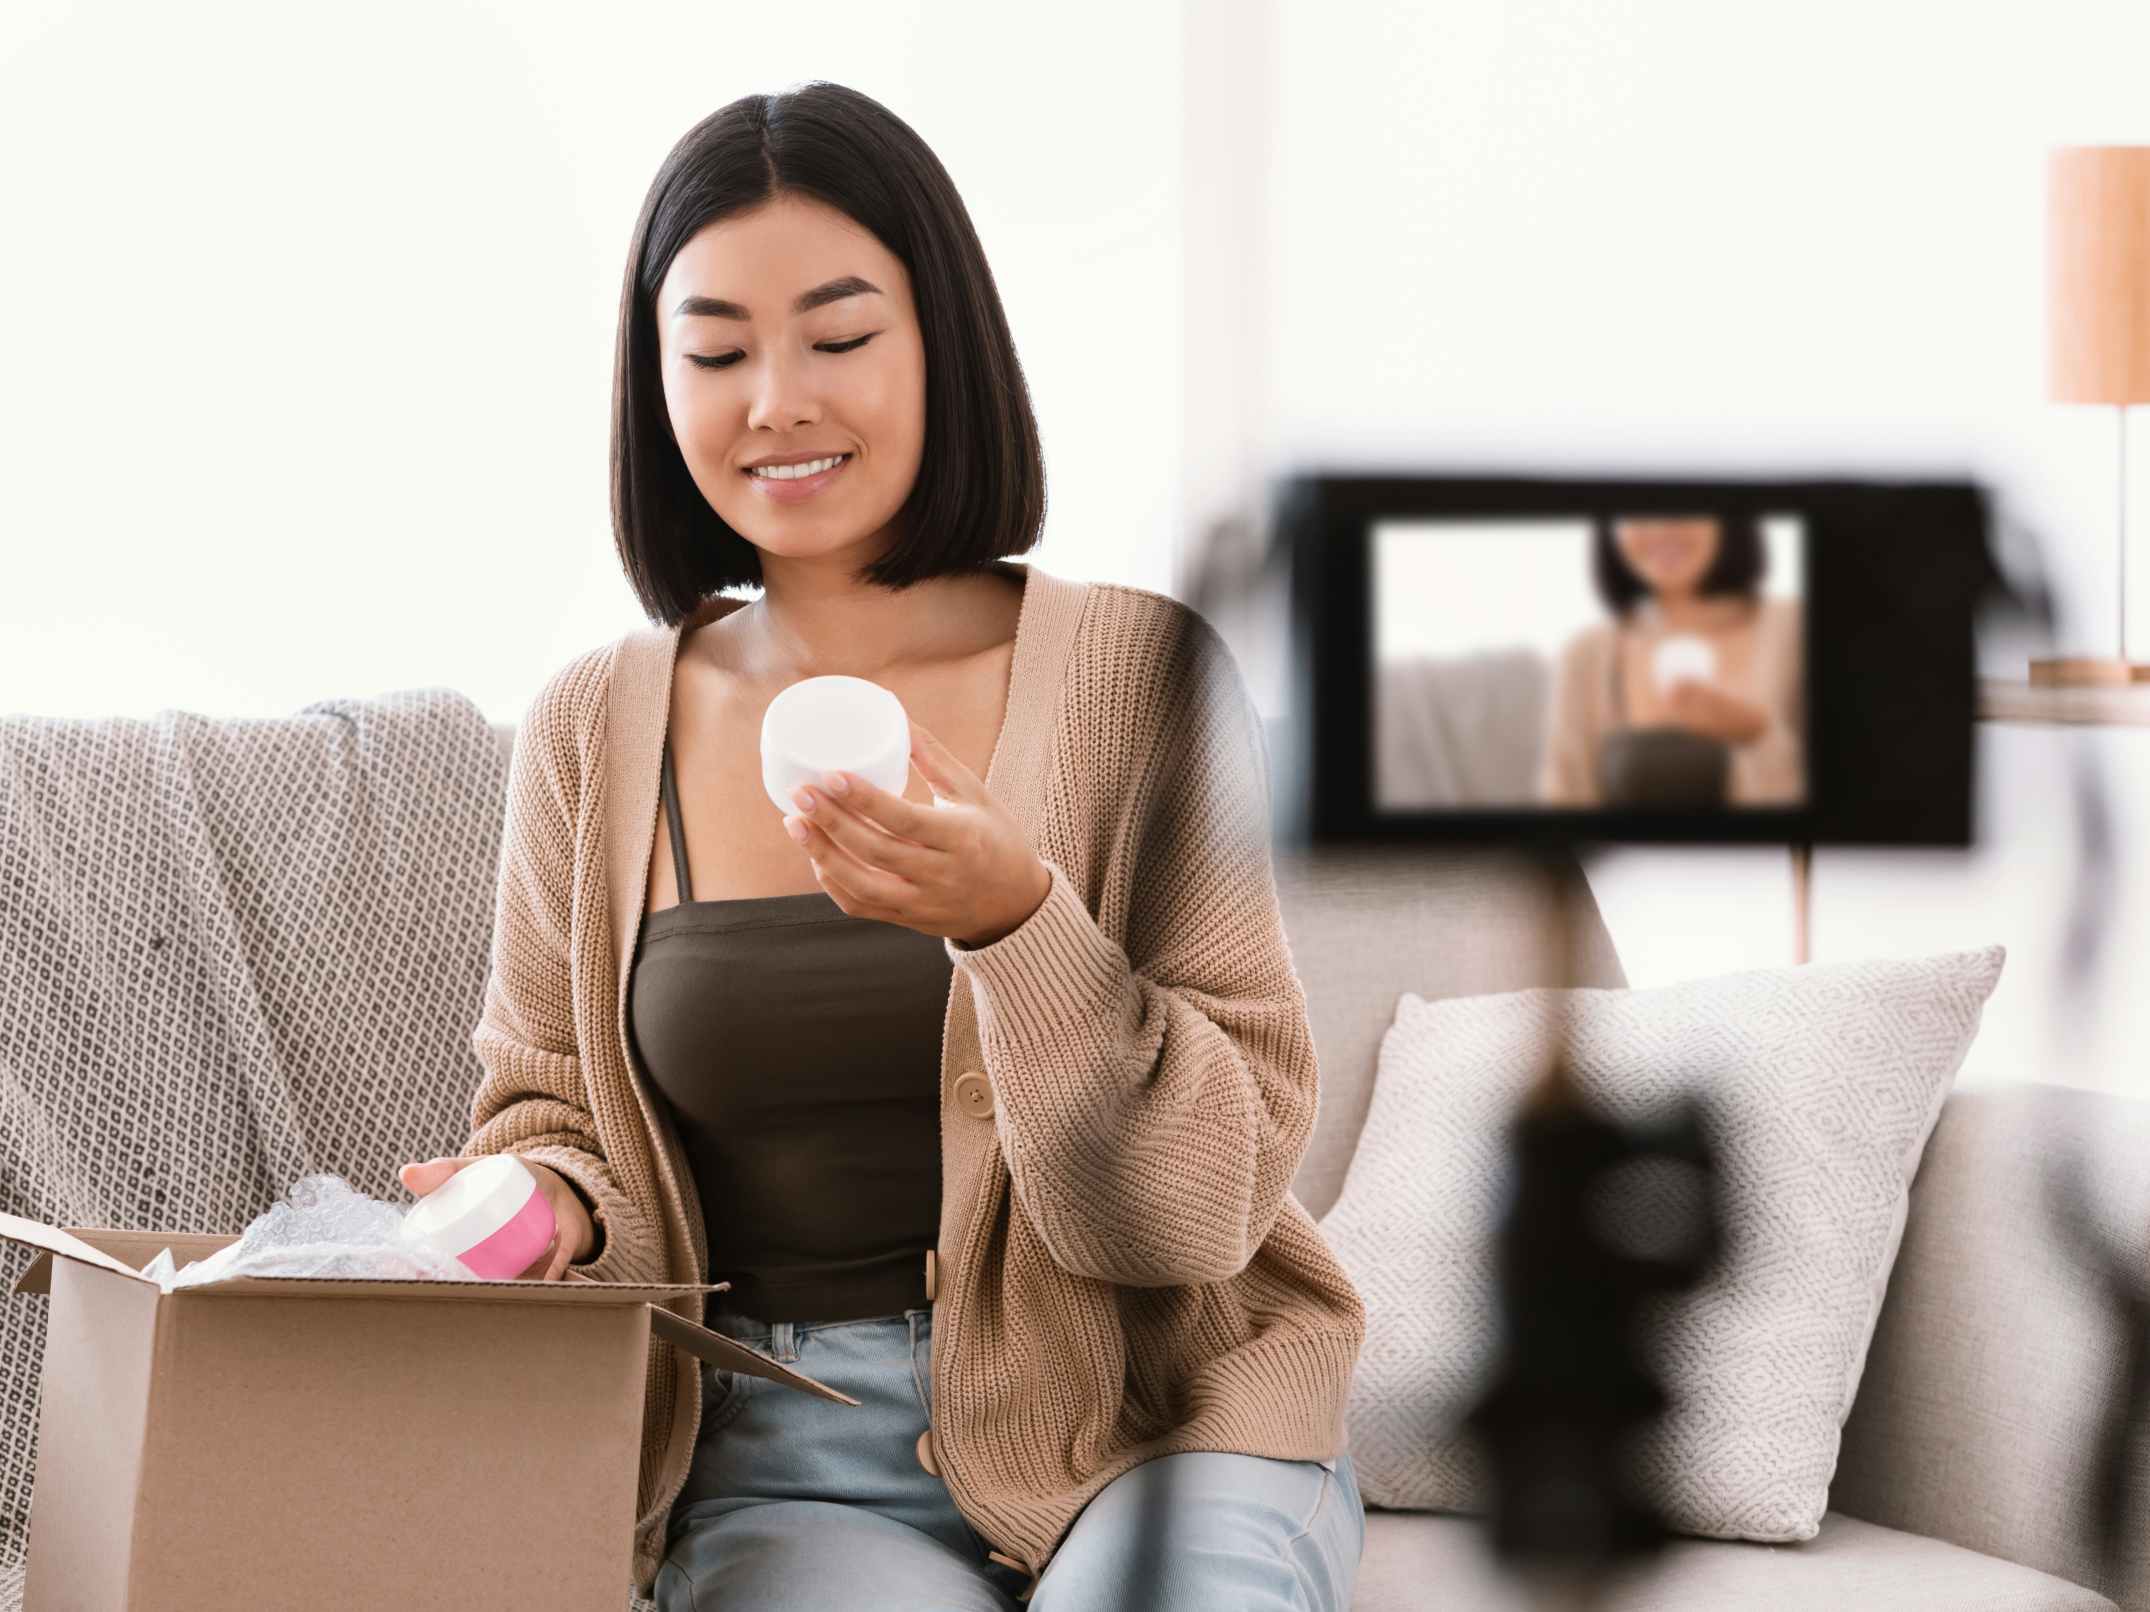 A woman taking products out of a box while sitting on a couch in front of a camera.